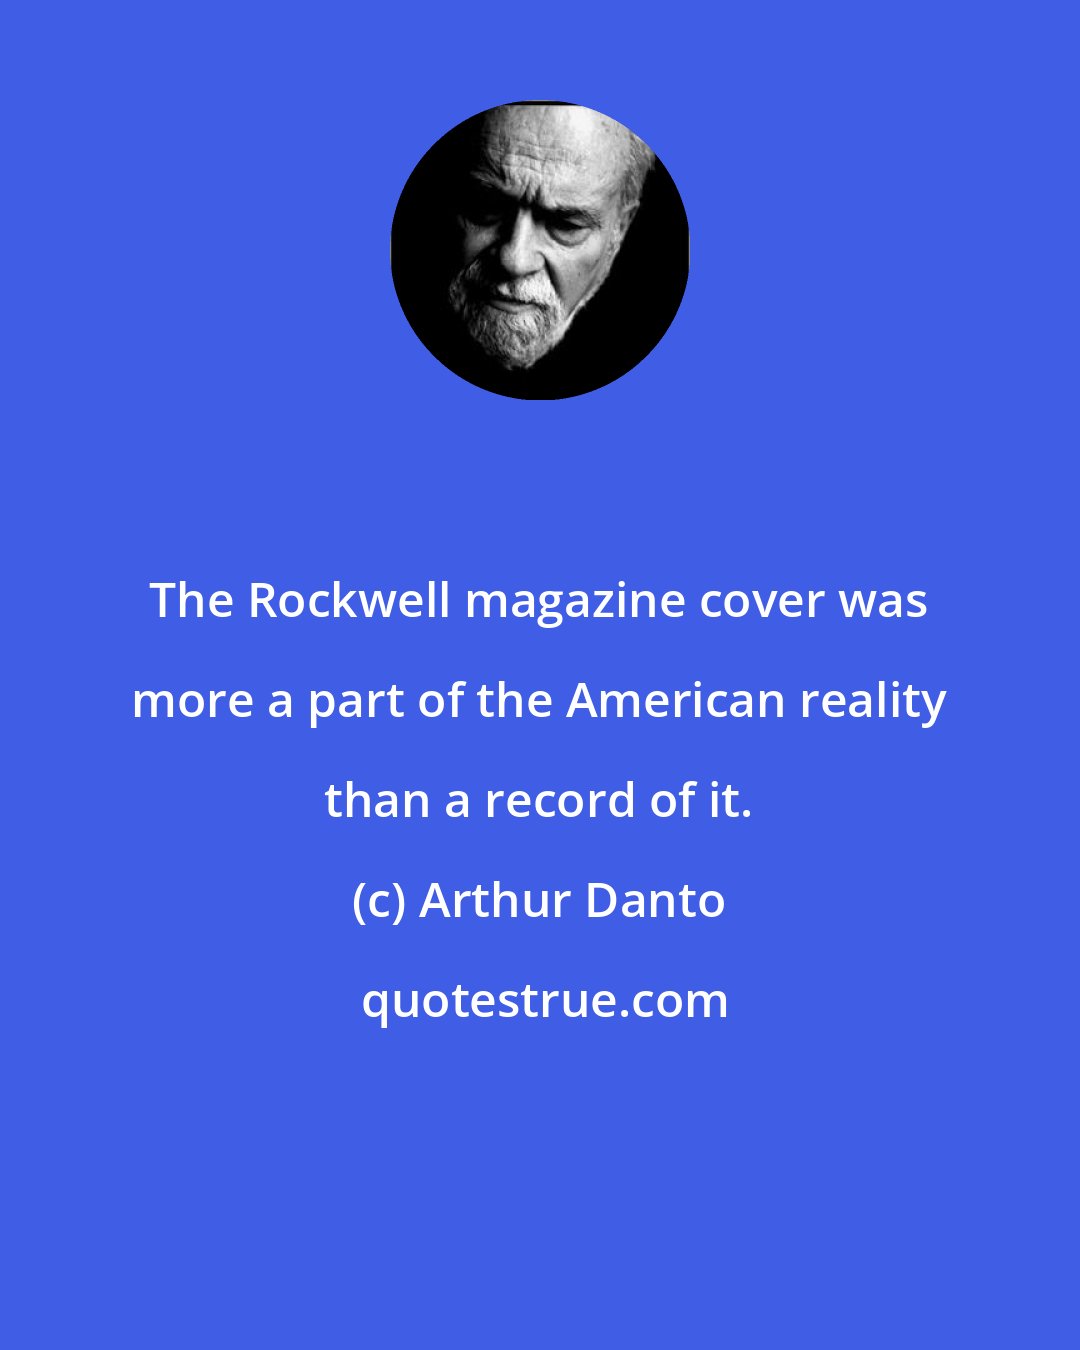 Arthur Danto: The Rockwell magazine cover was more a part of the American reality than a record of it.